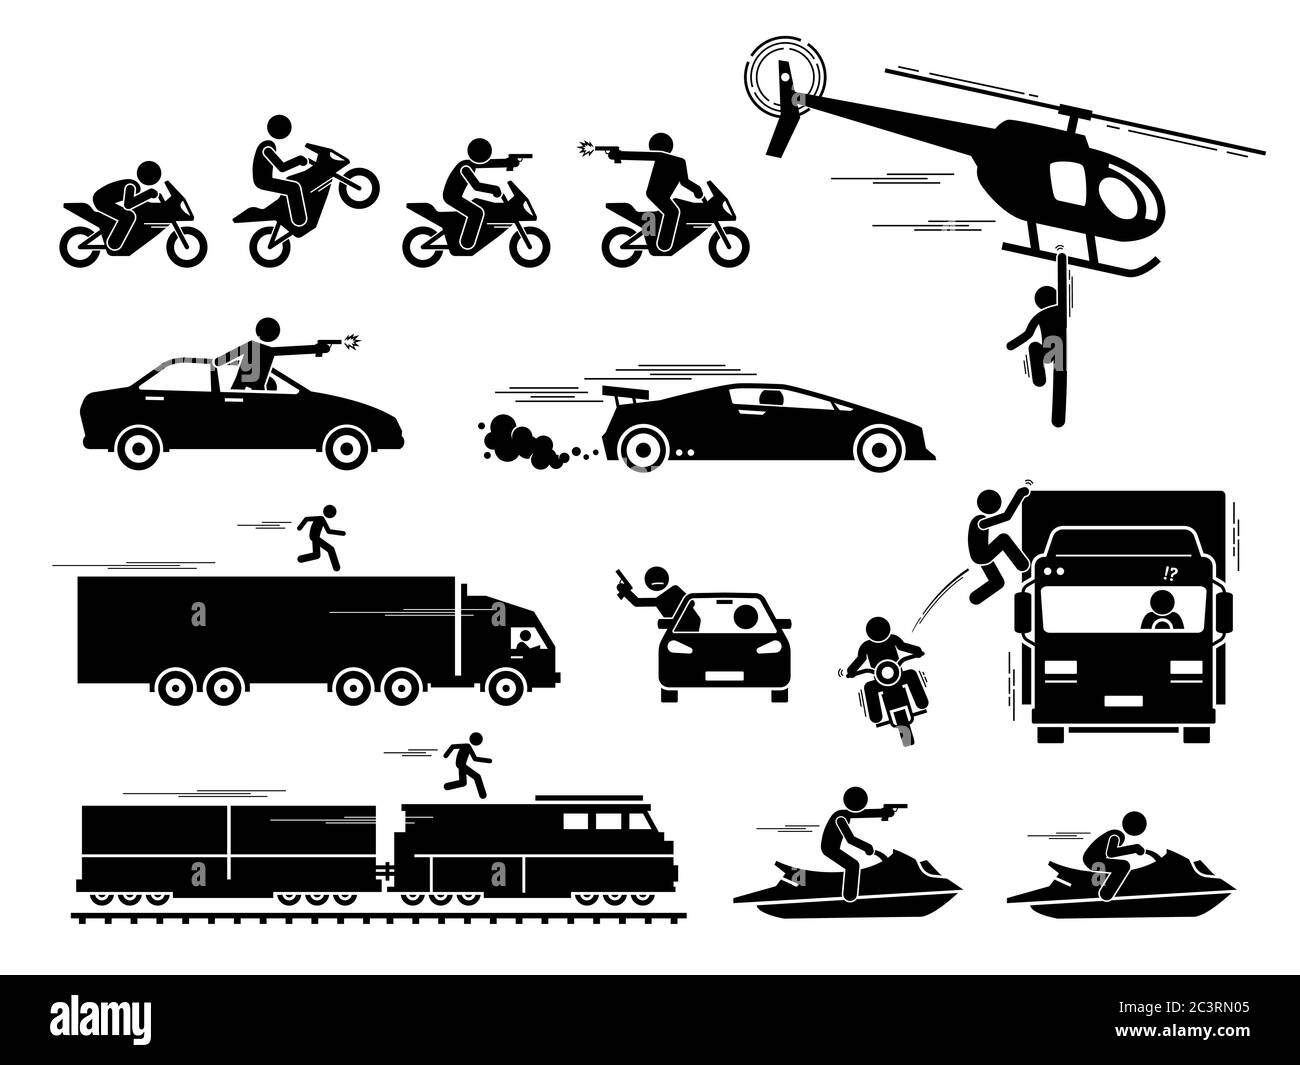 Movie action hero car motorcycle chase scene. Vector of people chasing and shooting with gun at car, motorcycle, and jet ski. Stunt man hanging on hel Stock Vector